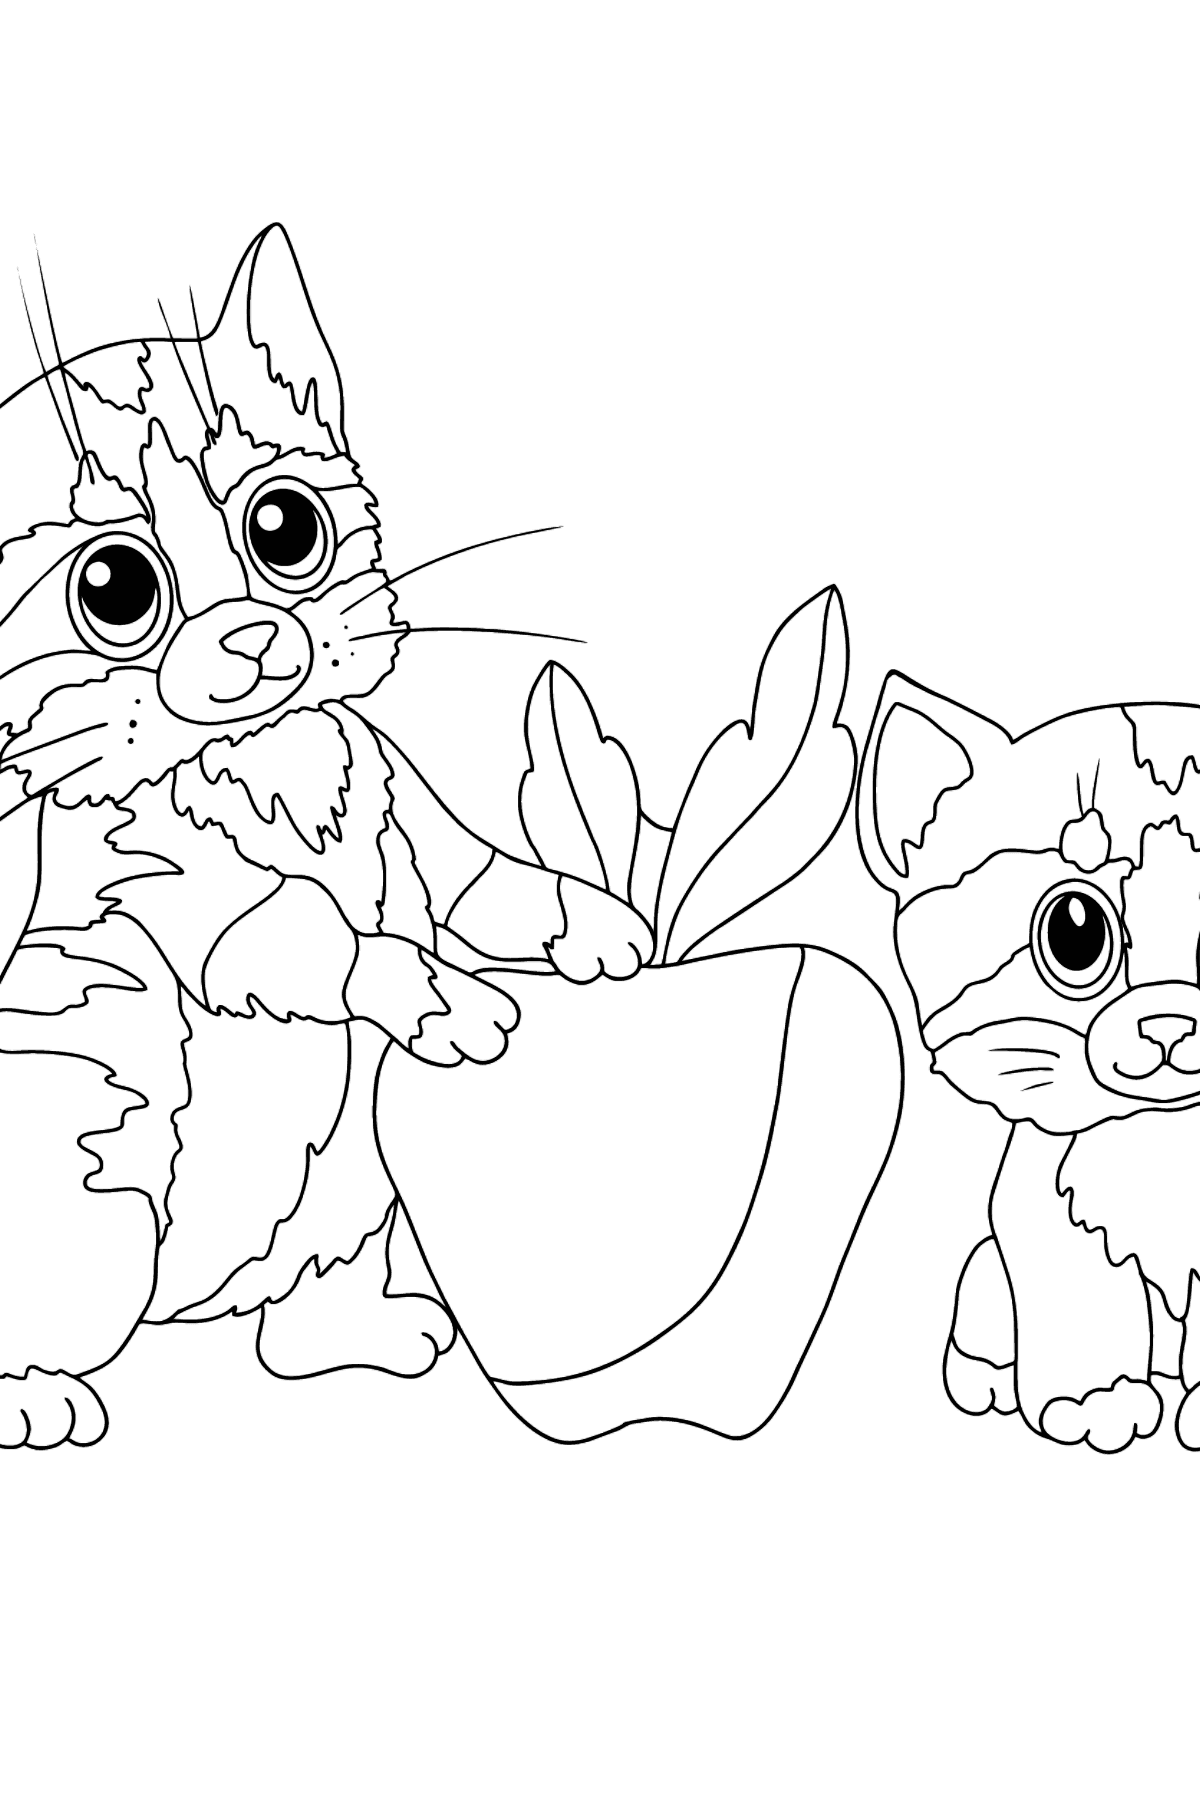 Little Kittens coloring page - Coloring Pages for Kids